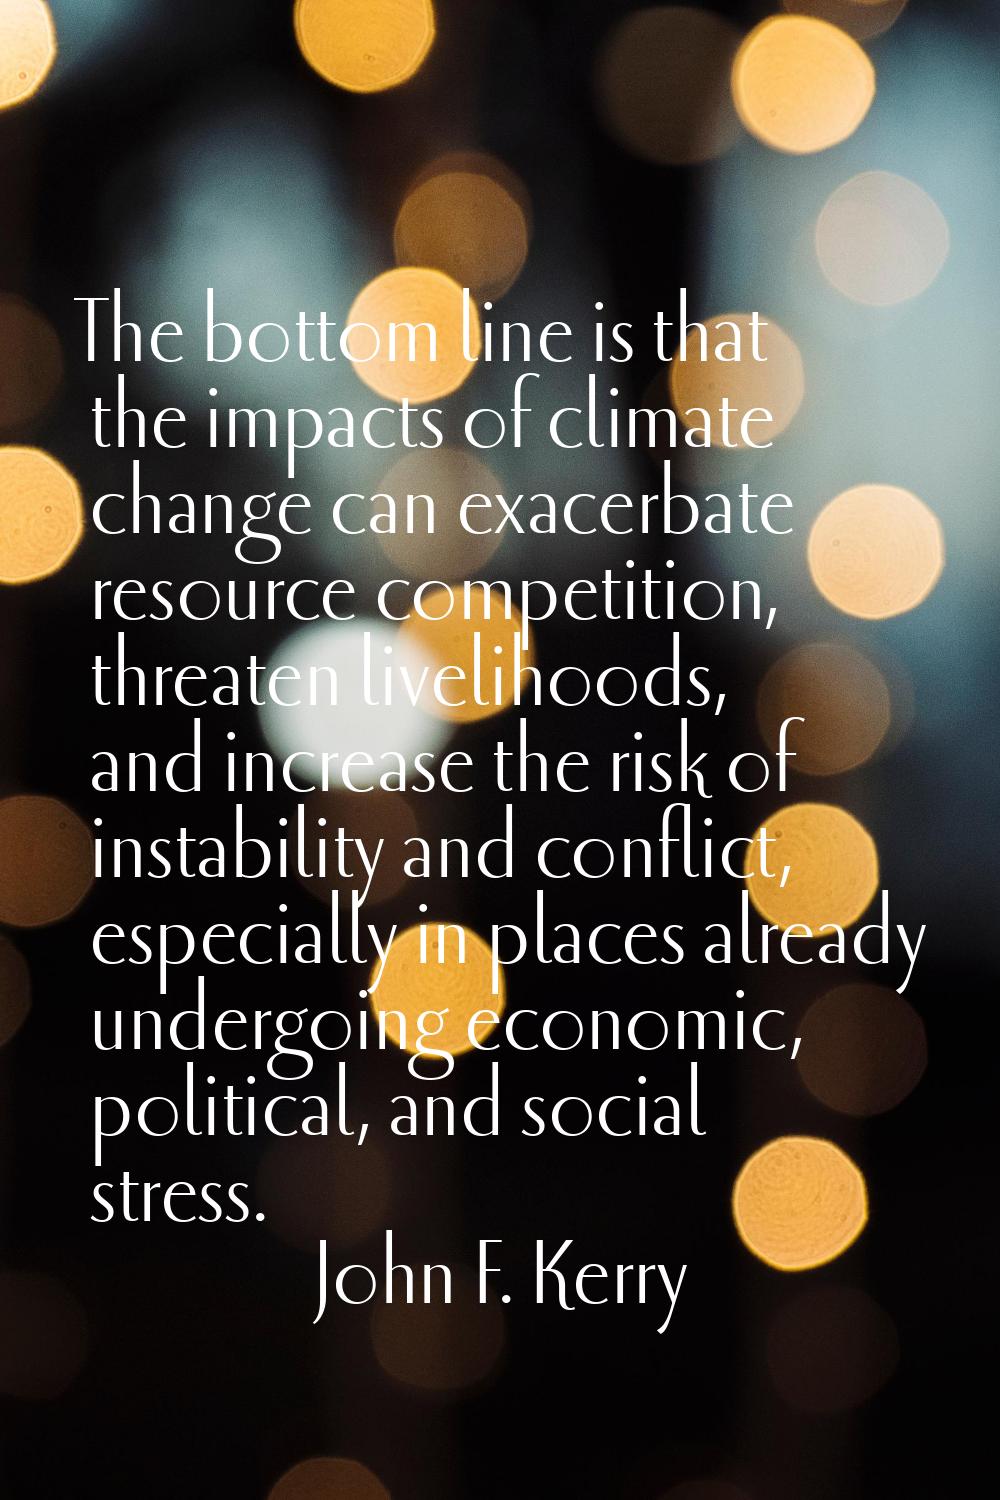 The bottom line is that the impacts of climate change can exacerbate resource competition, threaten